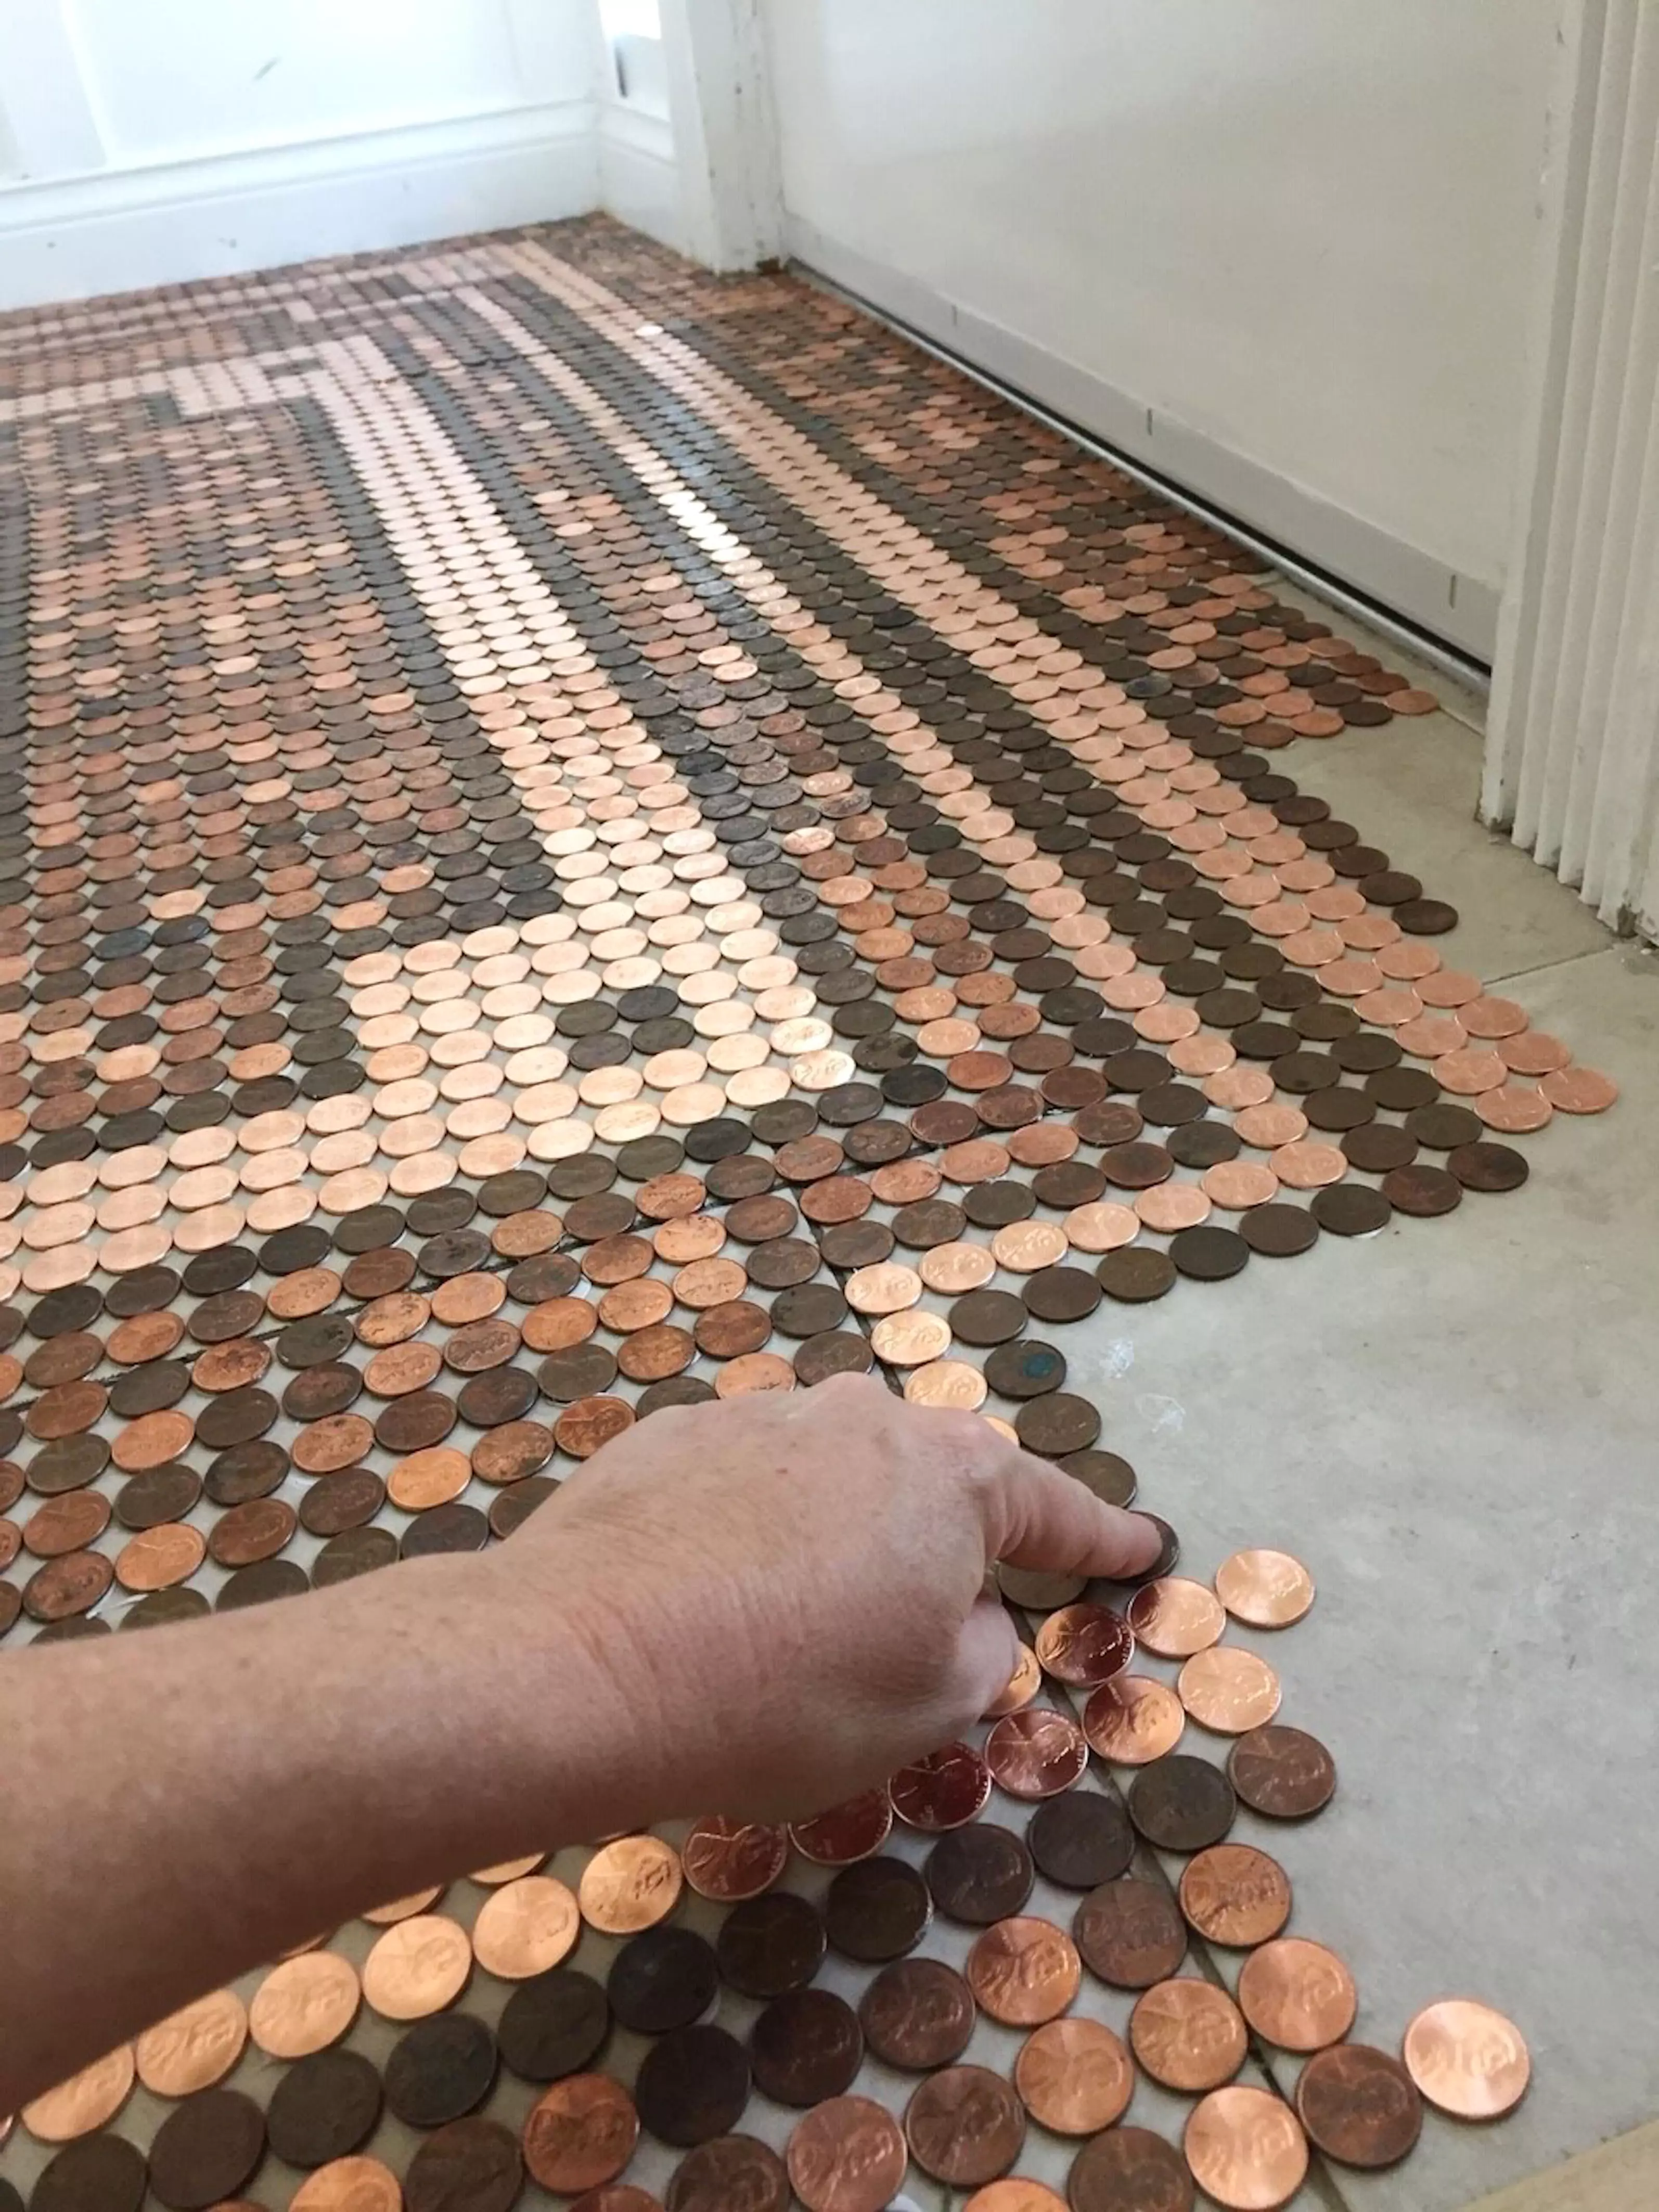 Kelly used 7,500 coins to complete the floor (